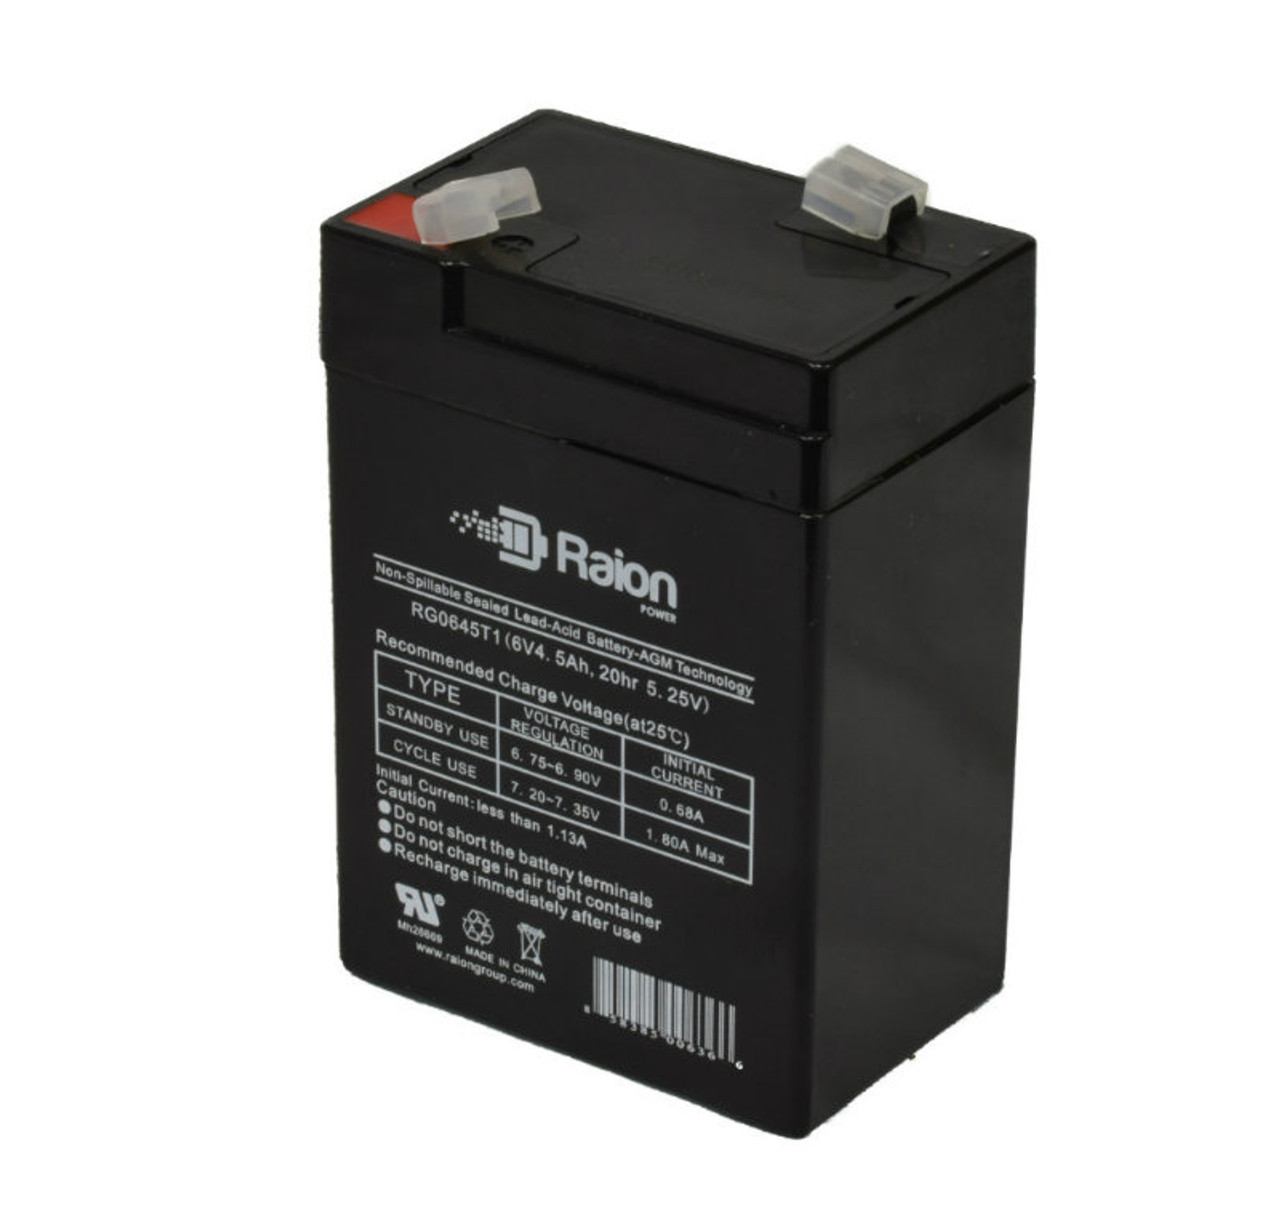 Raion Power RG0645T1 6V 4.5Ah Replacement Battery Cartridge for Light CE1-5BF